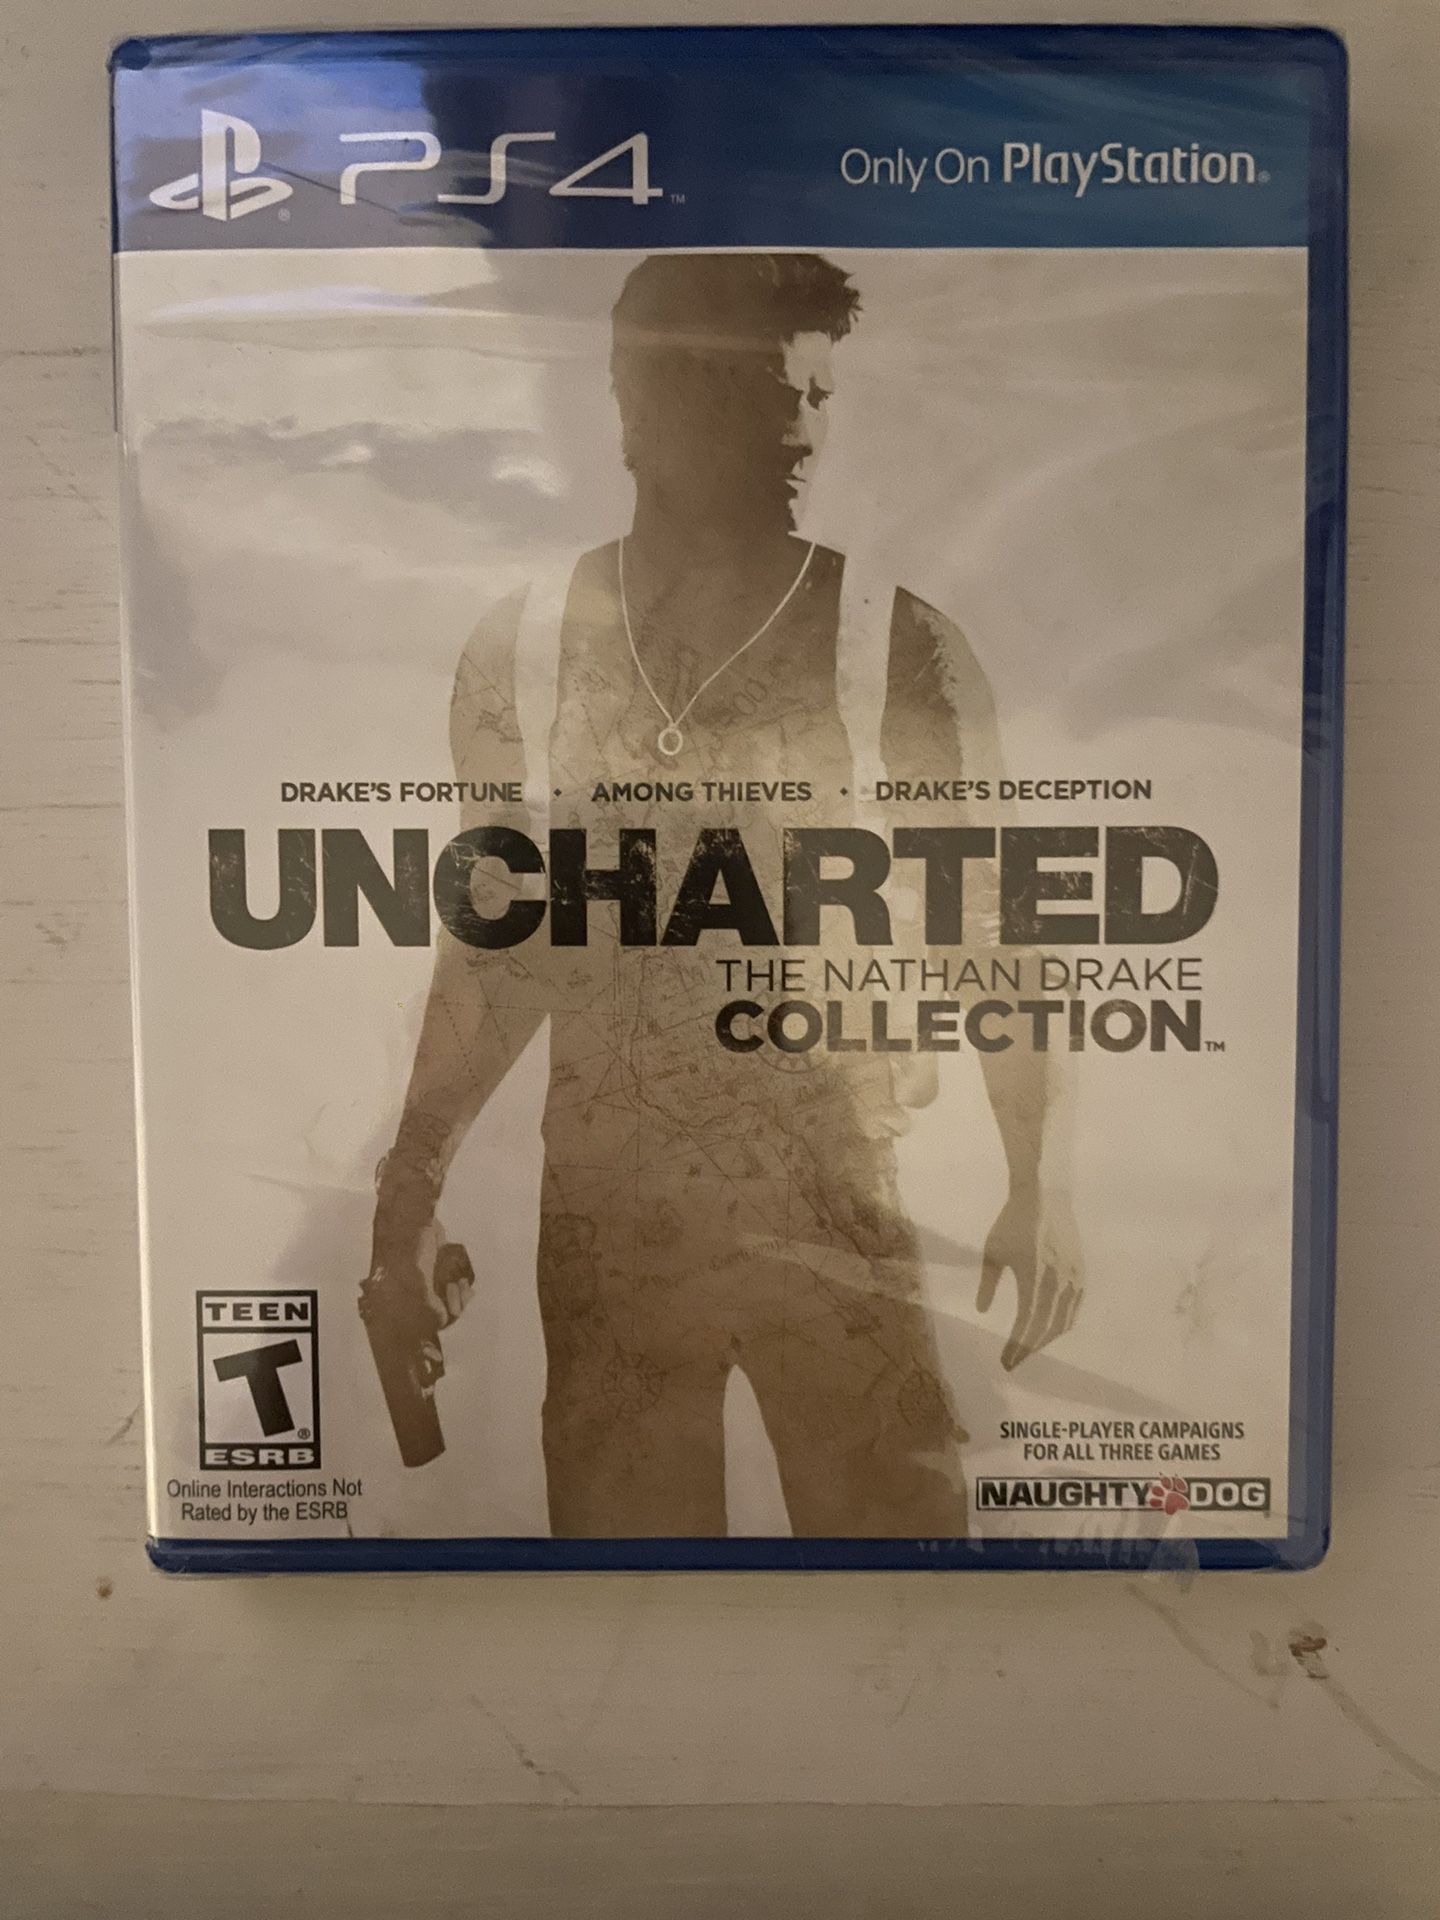 NEW Uncharted Nathan Drake Collection PS4 Game Sealed PlayStation 4